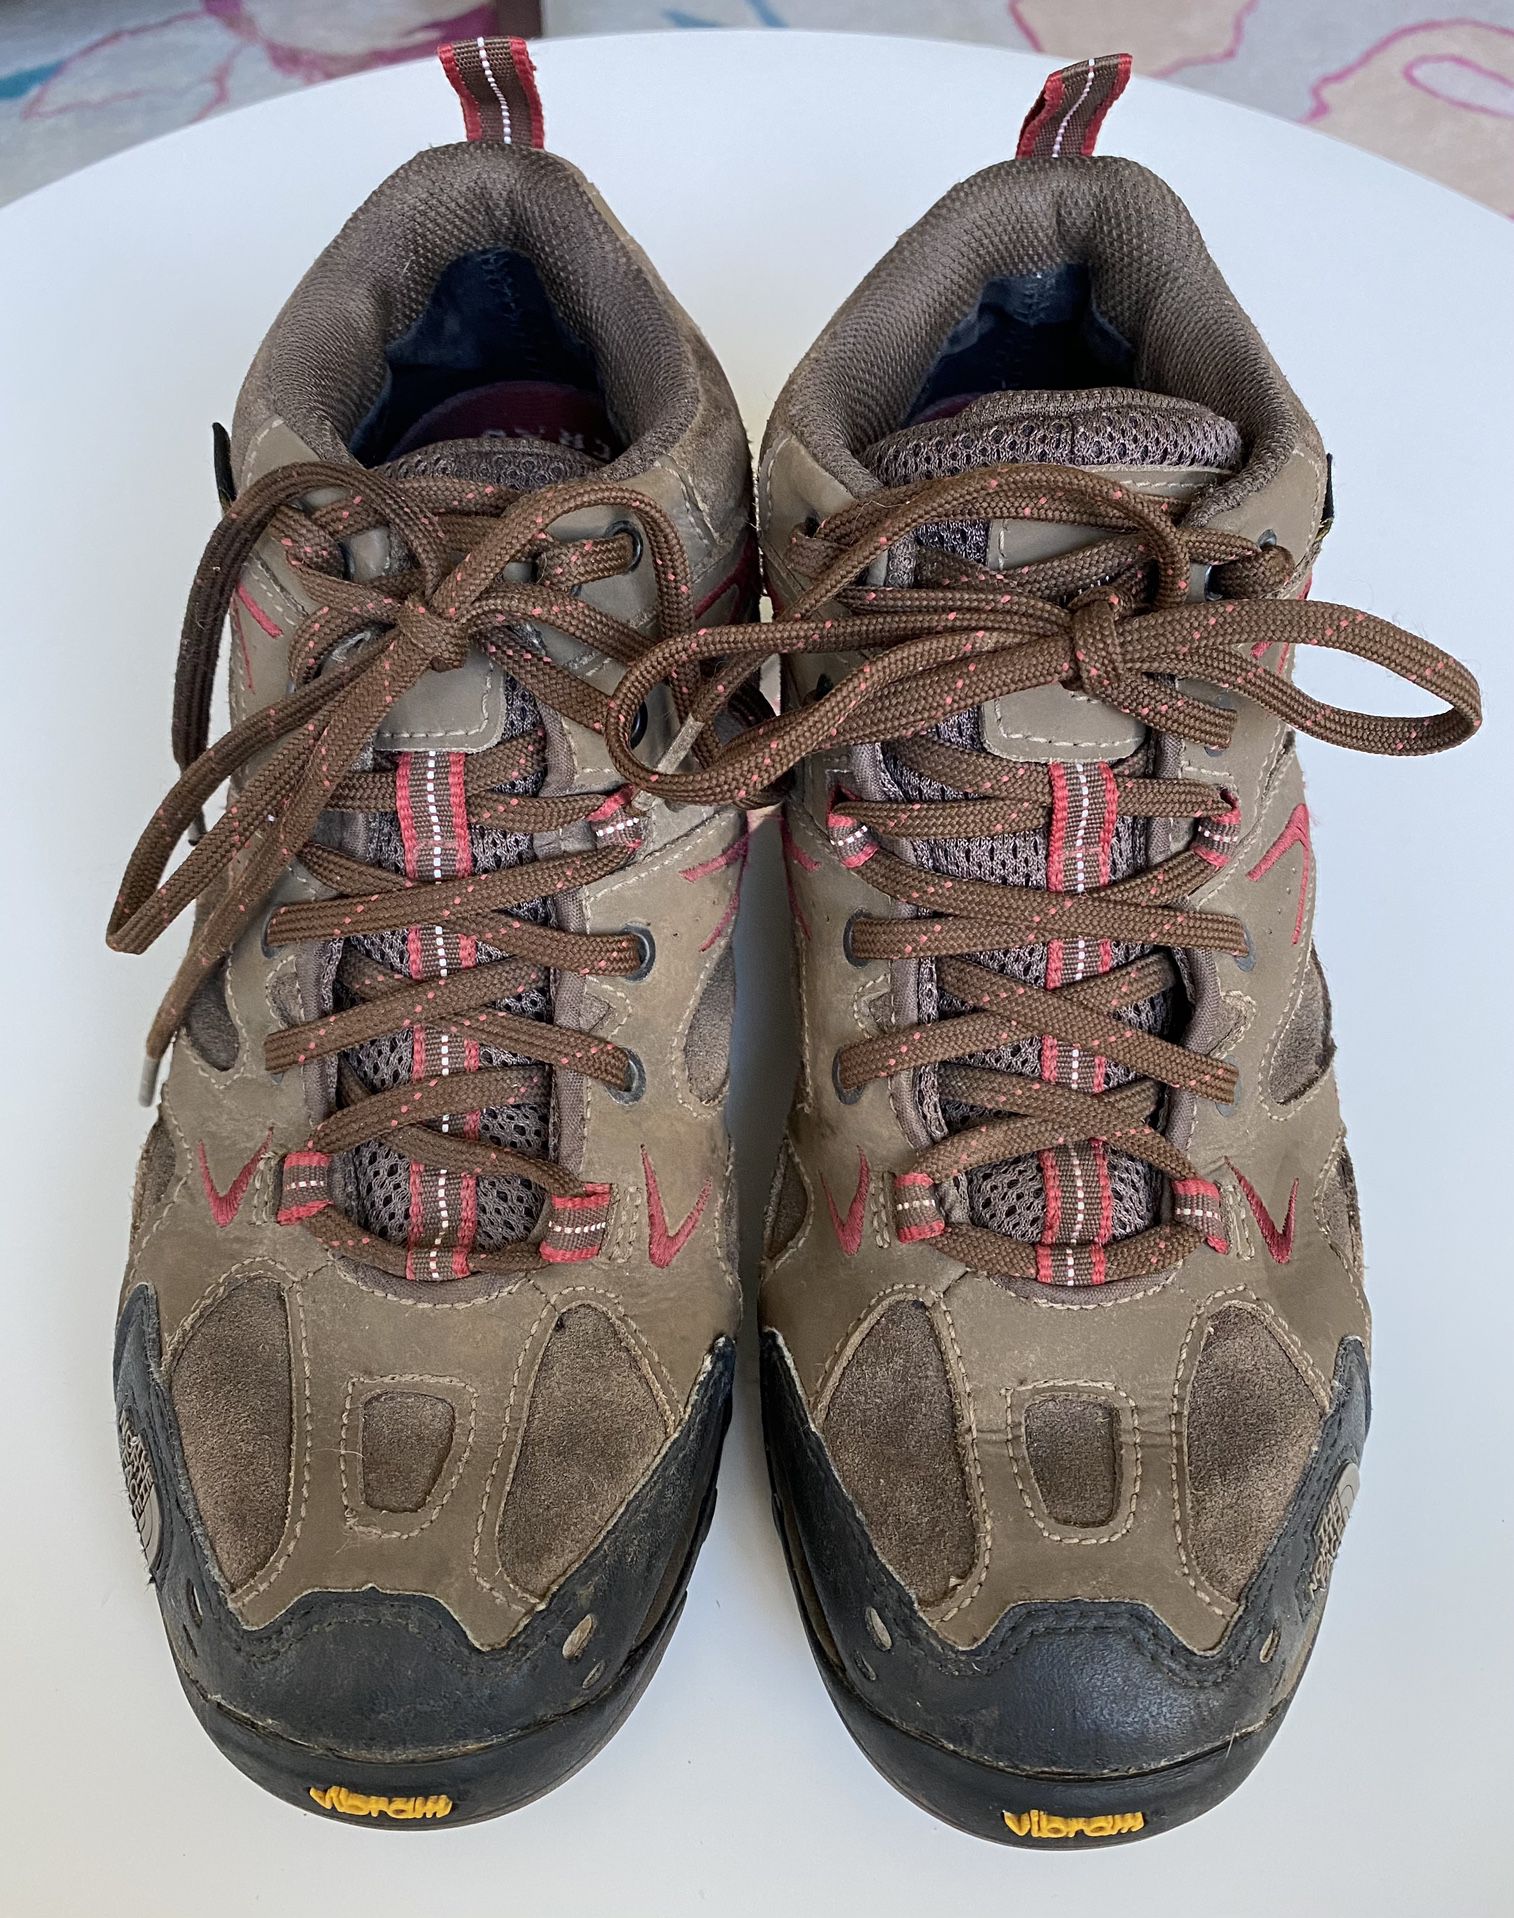 Men’s Size 7.5 The North Face Gortex Mid Hiking Boots 🥾